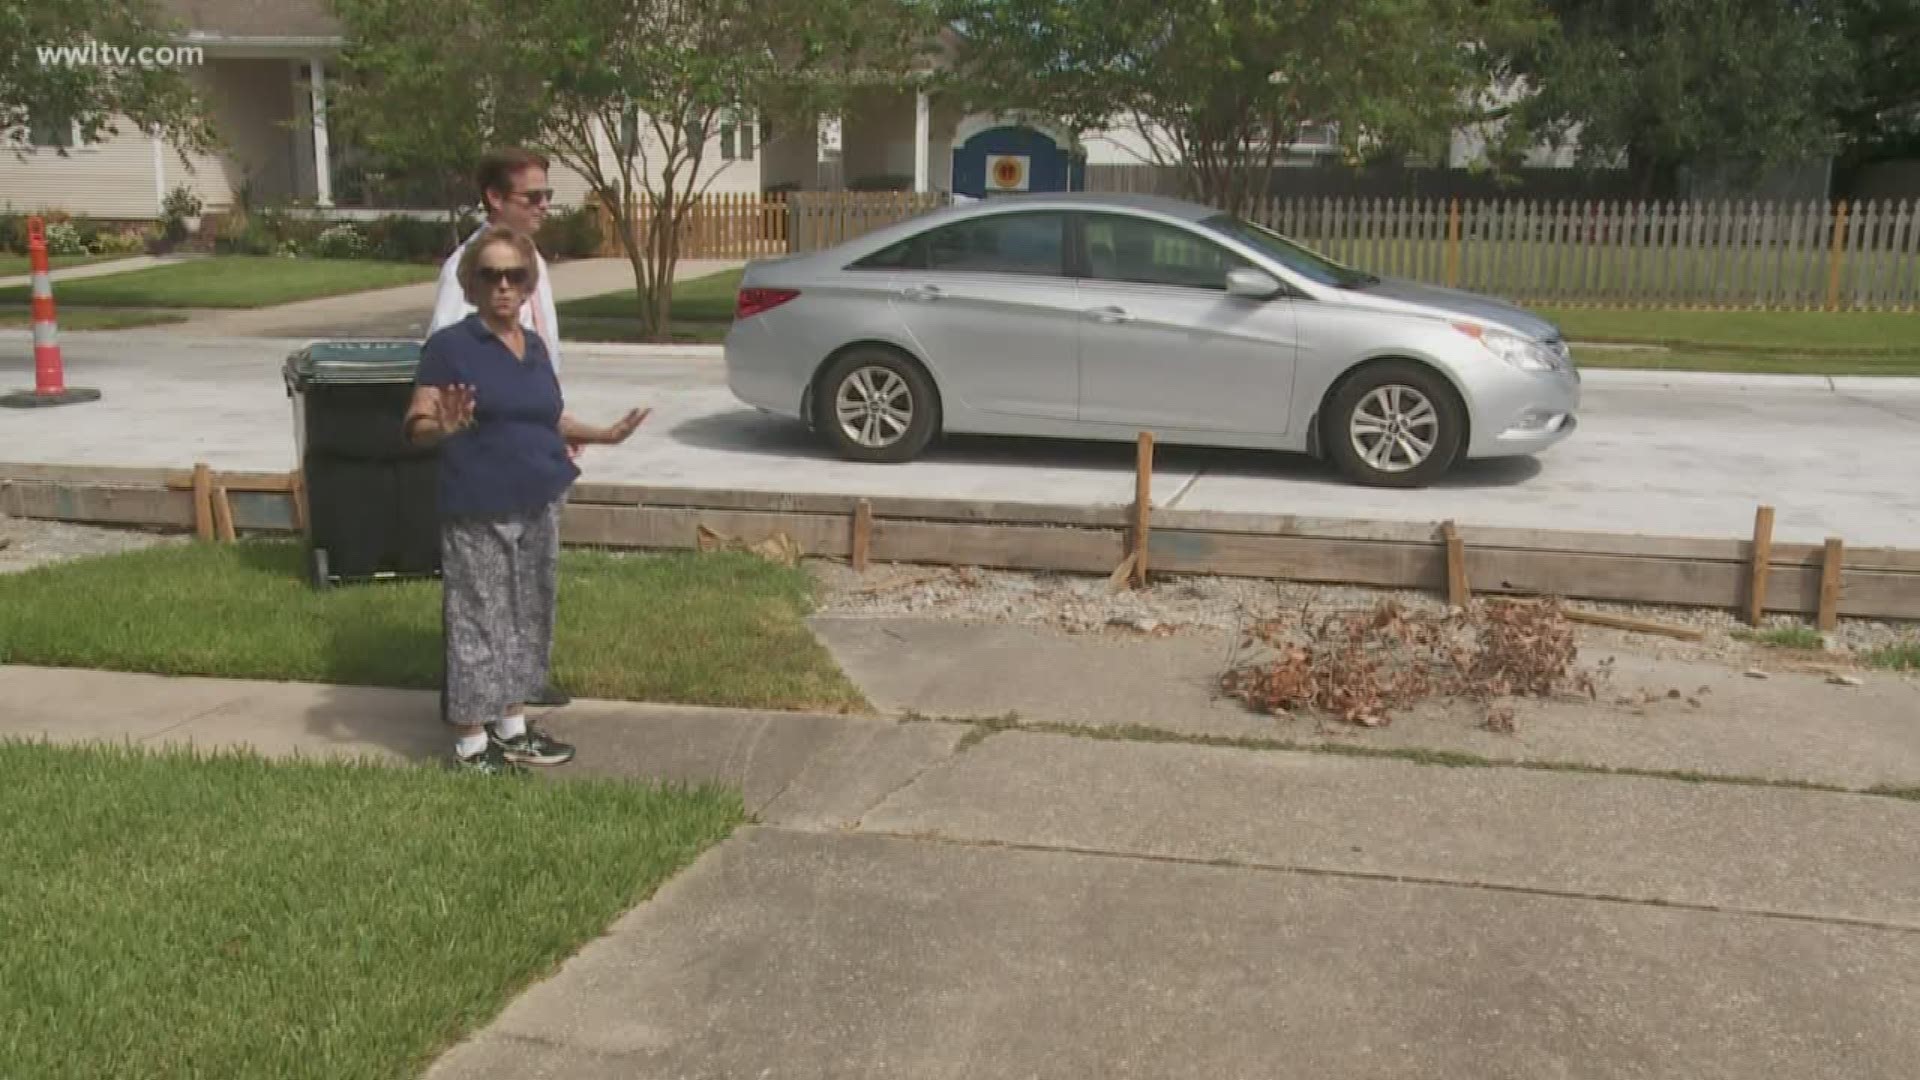 About a half dozen homes on the street now find themselves up to 1 1/2 feet below the new raised roadway. MORE: https://www.wwltv.com/article/news/local/down-the-drain//289-0db2a6e3-93f2-4dd7-992f-700acbe17c67